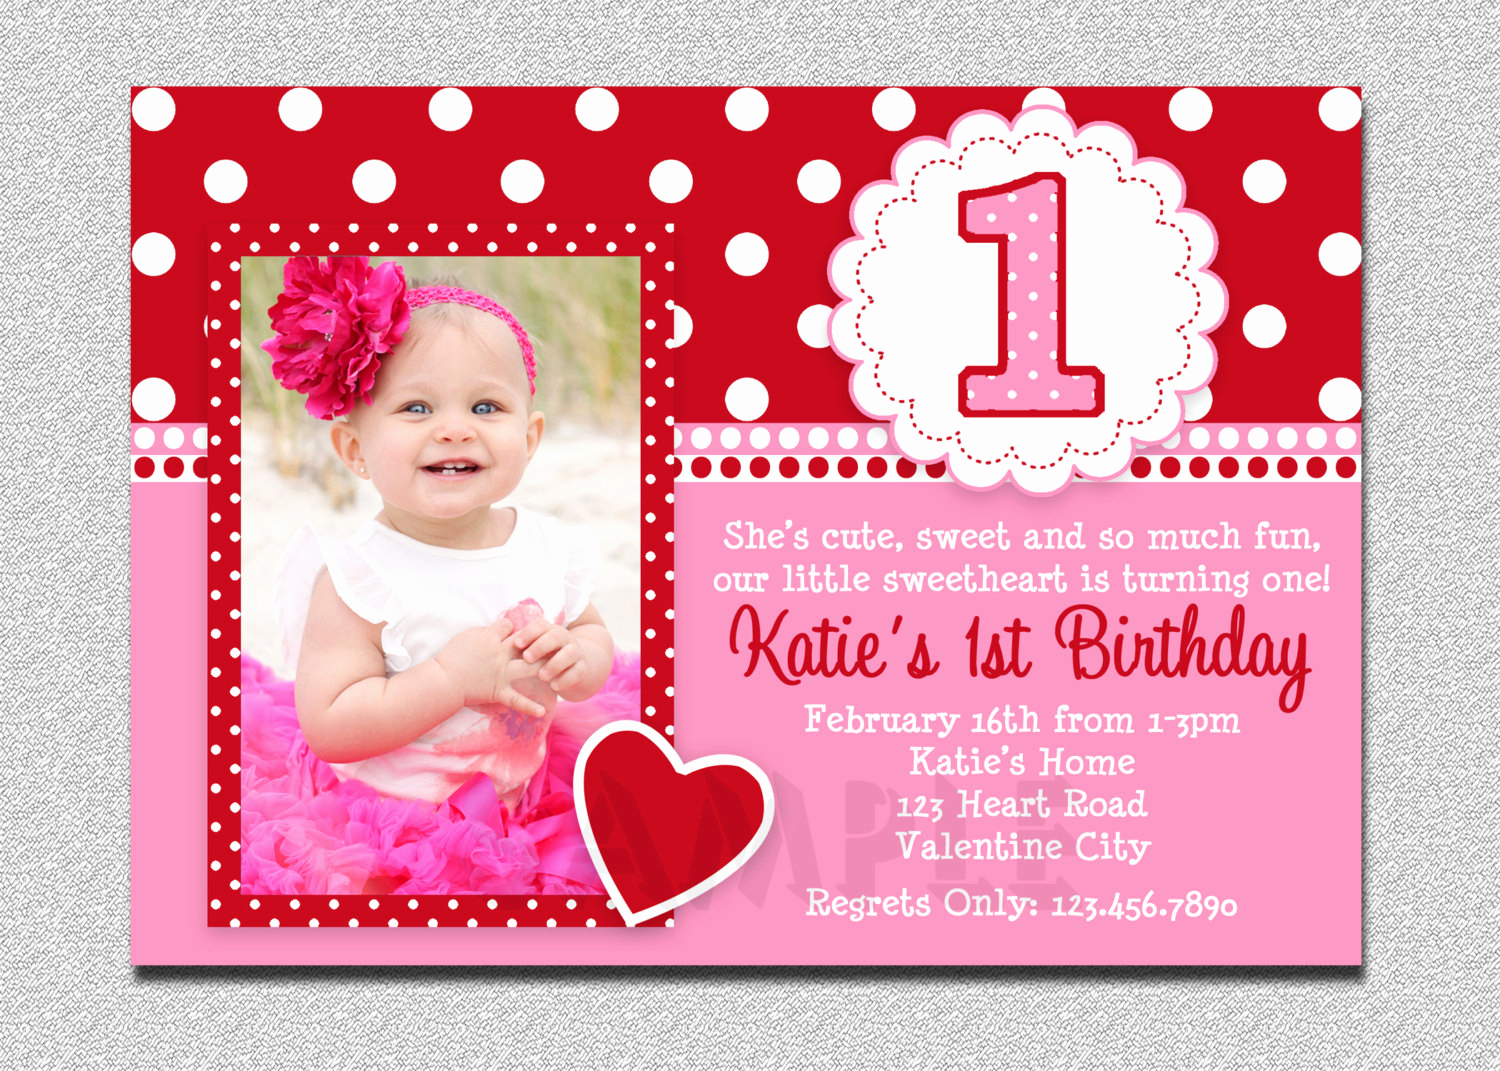 Birthday Party Invitation Ideas Awesome First Birthday Party Invitation Ideas – Bagvania Free